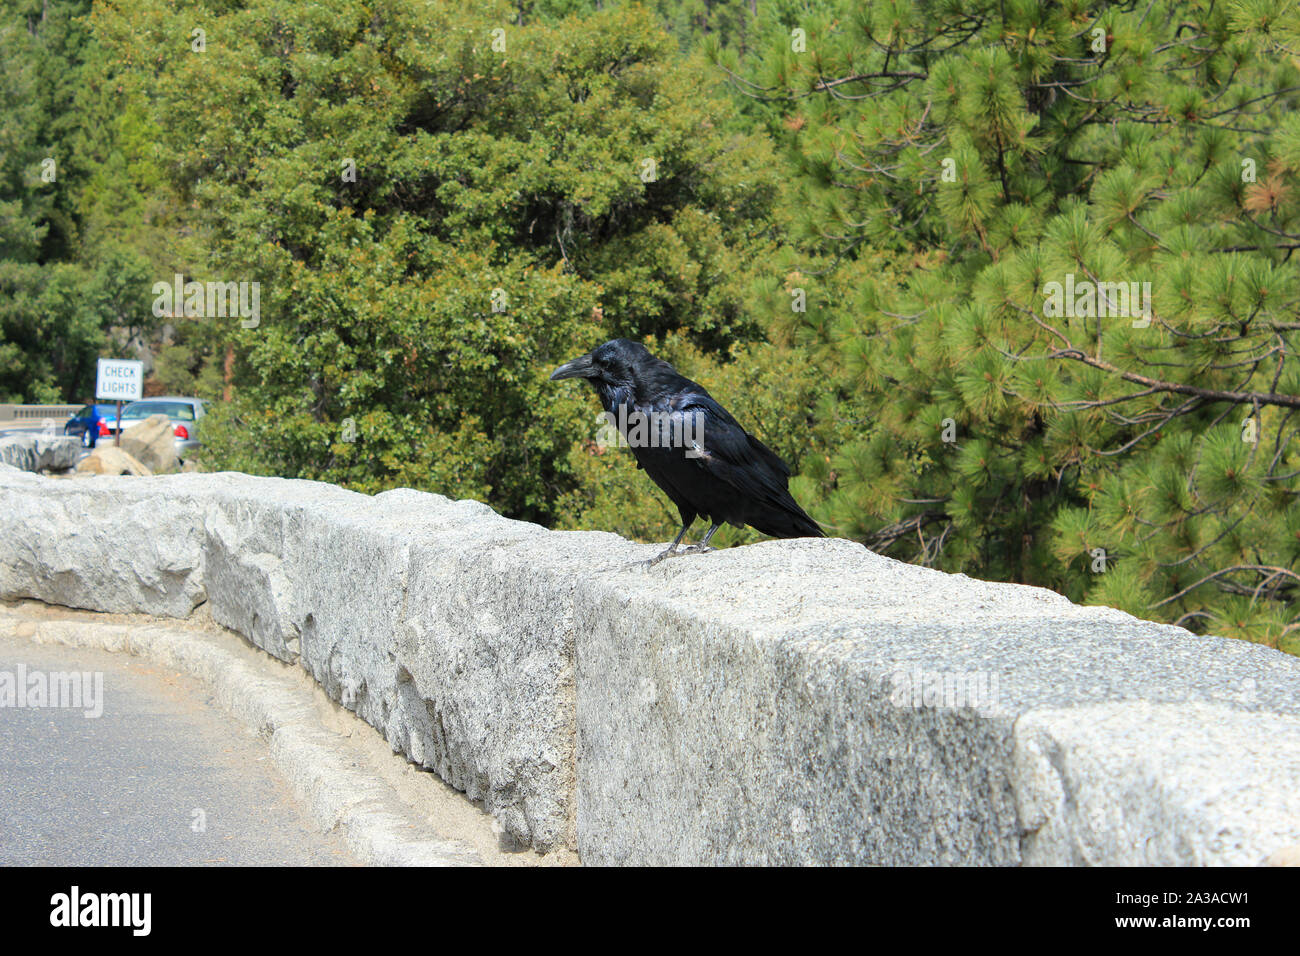 Black crow sitting along the perimeter wall of the road in Yosemite National Park, California, USA Stock Photo